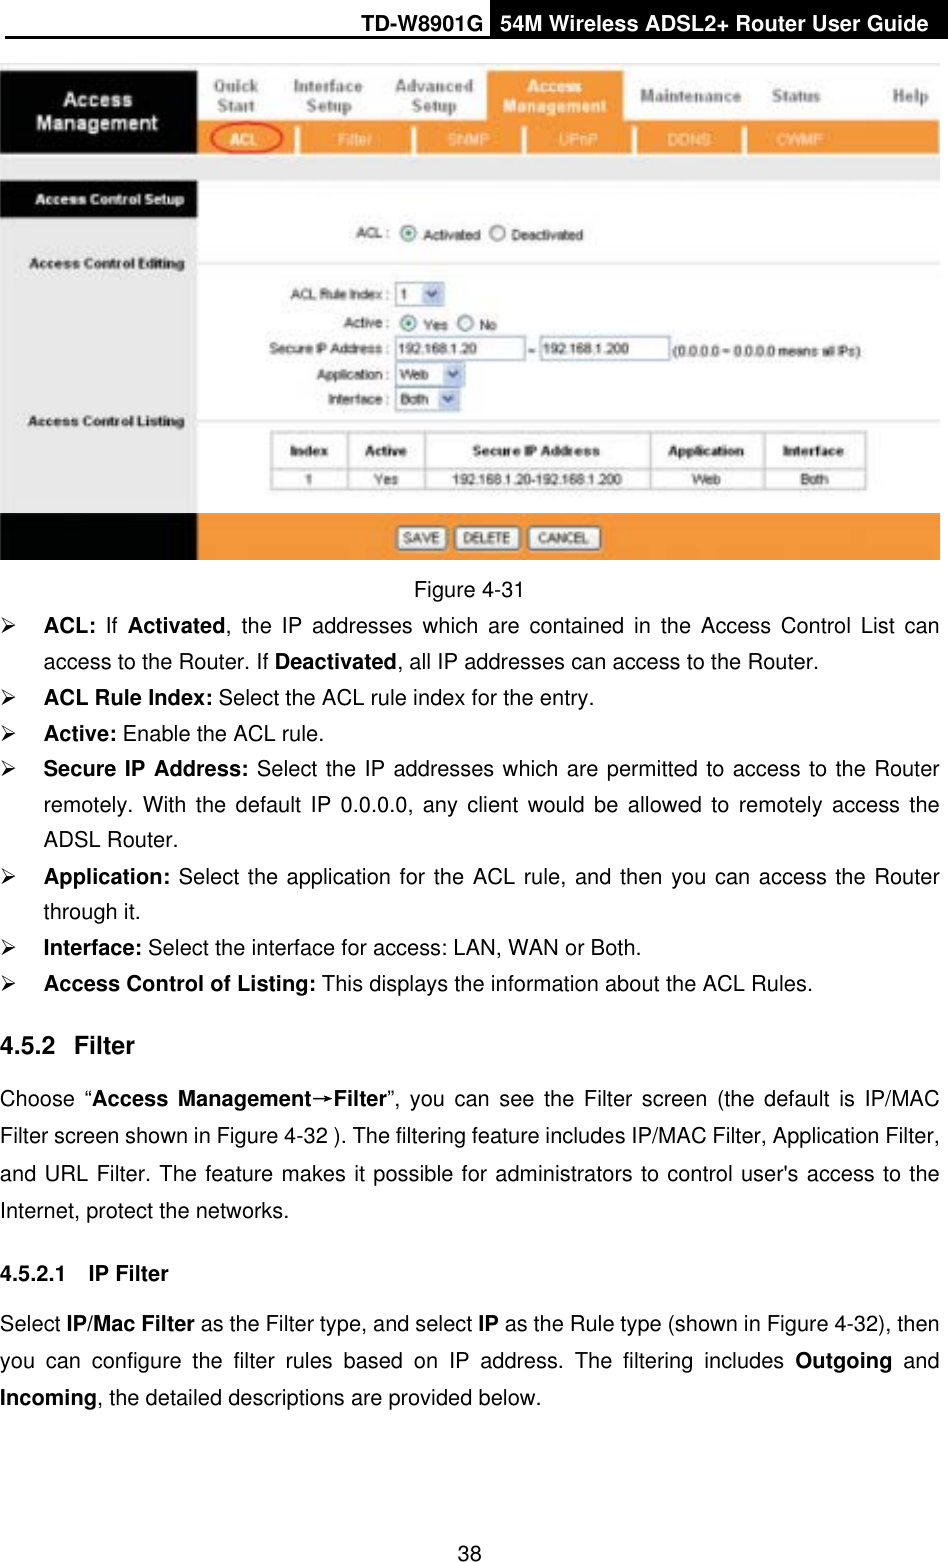 TD-W8901G 54M Wireless ADSL2+ Router User Guide38Figure 4-31 ¾ACL: If Activated, the IP addresses which are contained in the Access Control List can access to the Router. If Deactivated, all IP addresses can access to the Router. ¾ACL Rule Index: Select the ACL rule index for the entry.   ¾Active: Enable the ACL rule. ¾Secure IP Address: Select the IP addresses which are permitted to access to the Router remotely. With the default IP 0.0.0.0, any client would be allowed to remotely access the ADSL Router. ¾Application: Select the application for the ACL rule, and then you can access the Router through it. ¾Interface: Select the interface for access: LAN, WAN or Both. ¾Access Control of Listing: This displays the information about the ACL Rules. 4.5.2 FilterChoose “Access ManagementėFilter”, you can see the Filter screen (the default is IP/MAC Filter screen shown in Figure 4-32 ). The filtering feature includes IP/MAC Filter, Application Filter, and URL Filter. The feature makes it possible for administrators to control user&apos;s access to the Internet, protect the networks. 4.5.2.1 IP Filter Select IP/Mac Filter as the Filter type, and select IP as the Rule type (shown in Figure 4-32), then you can configure the filter rules based on IP address. The filtering includes Outgoing andIncoming, the detailed descriptions are provided below.